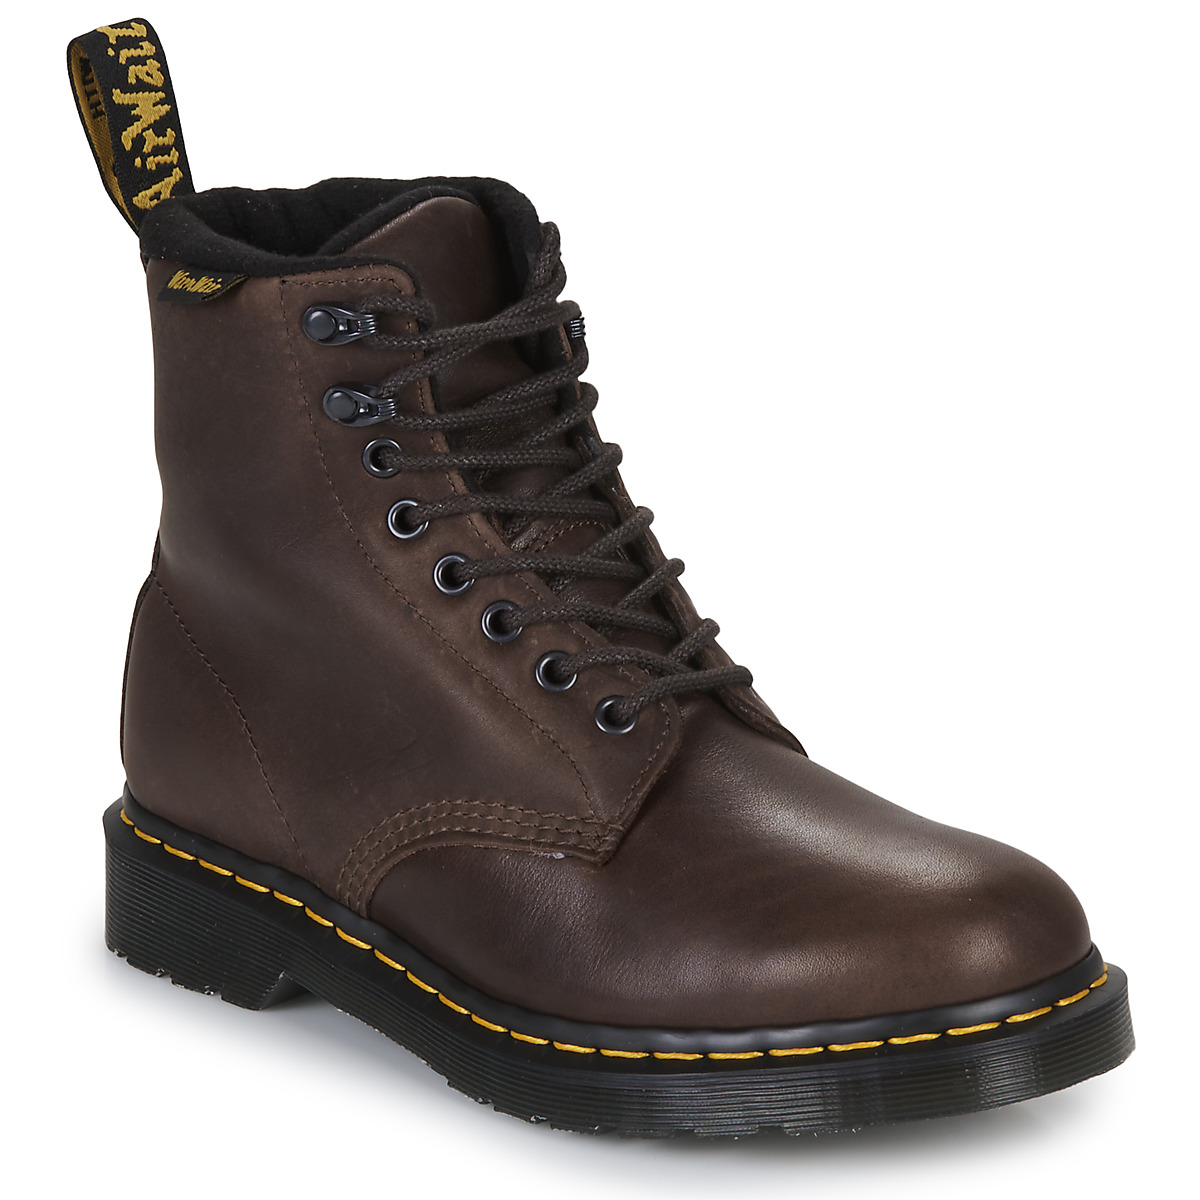 Chaussures Boots Dr. haring Martens 1460 PASCAL VALOR WP Marron